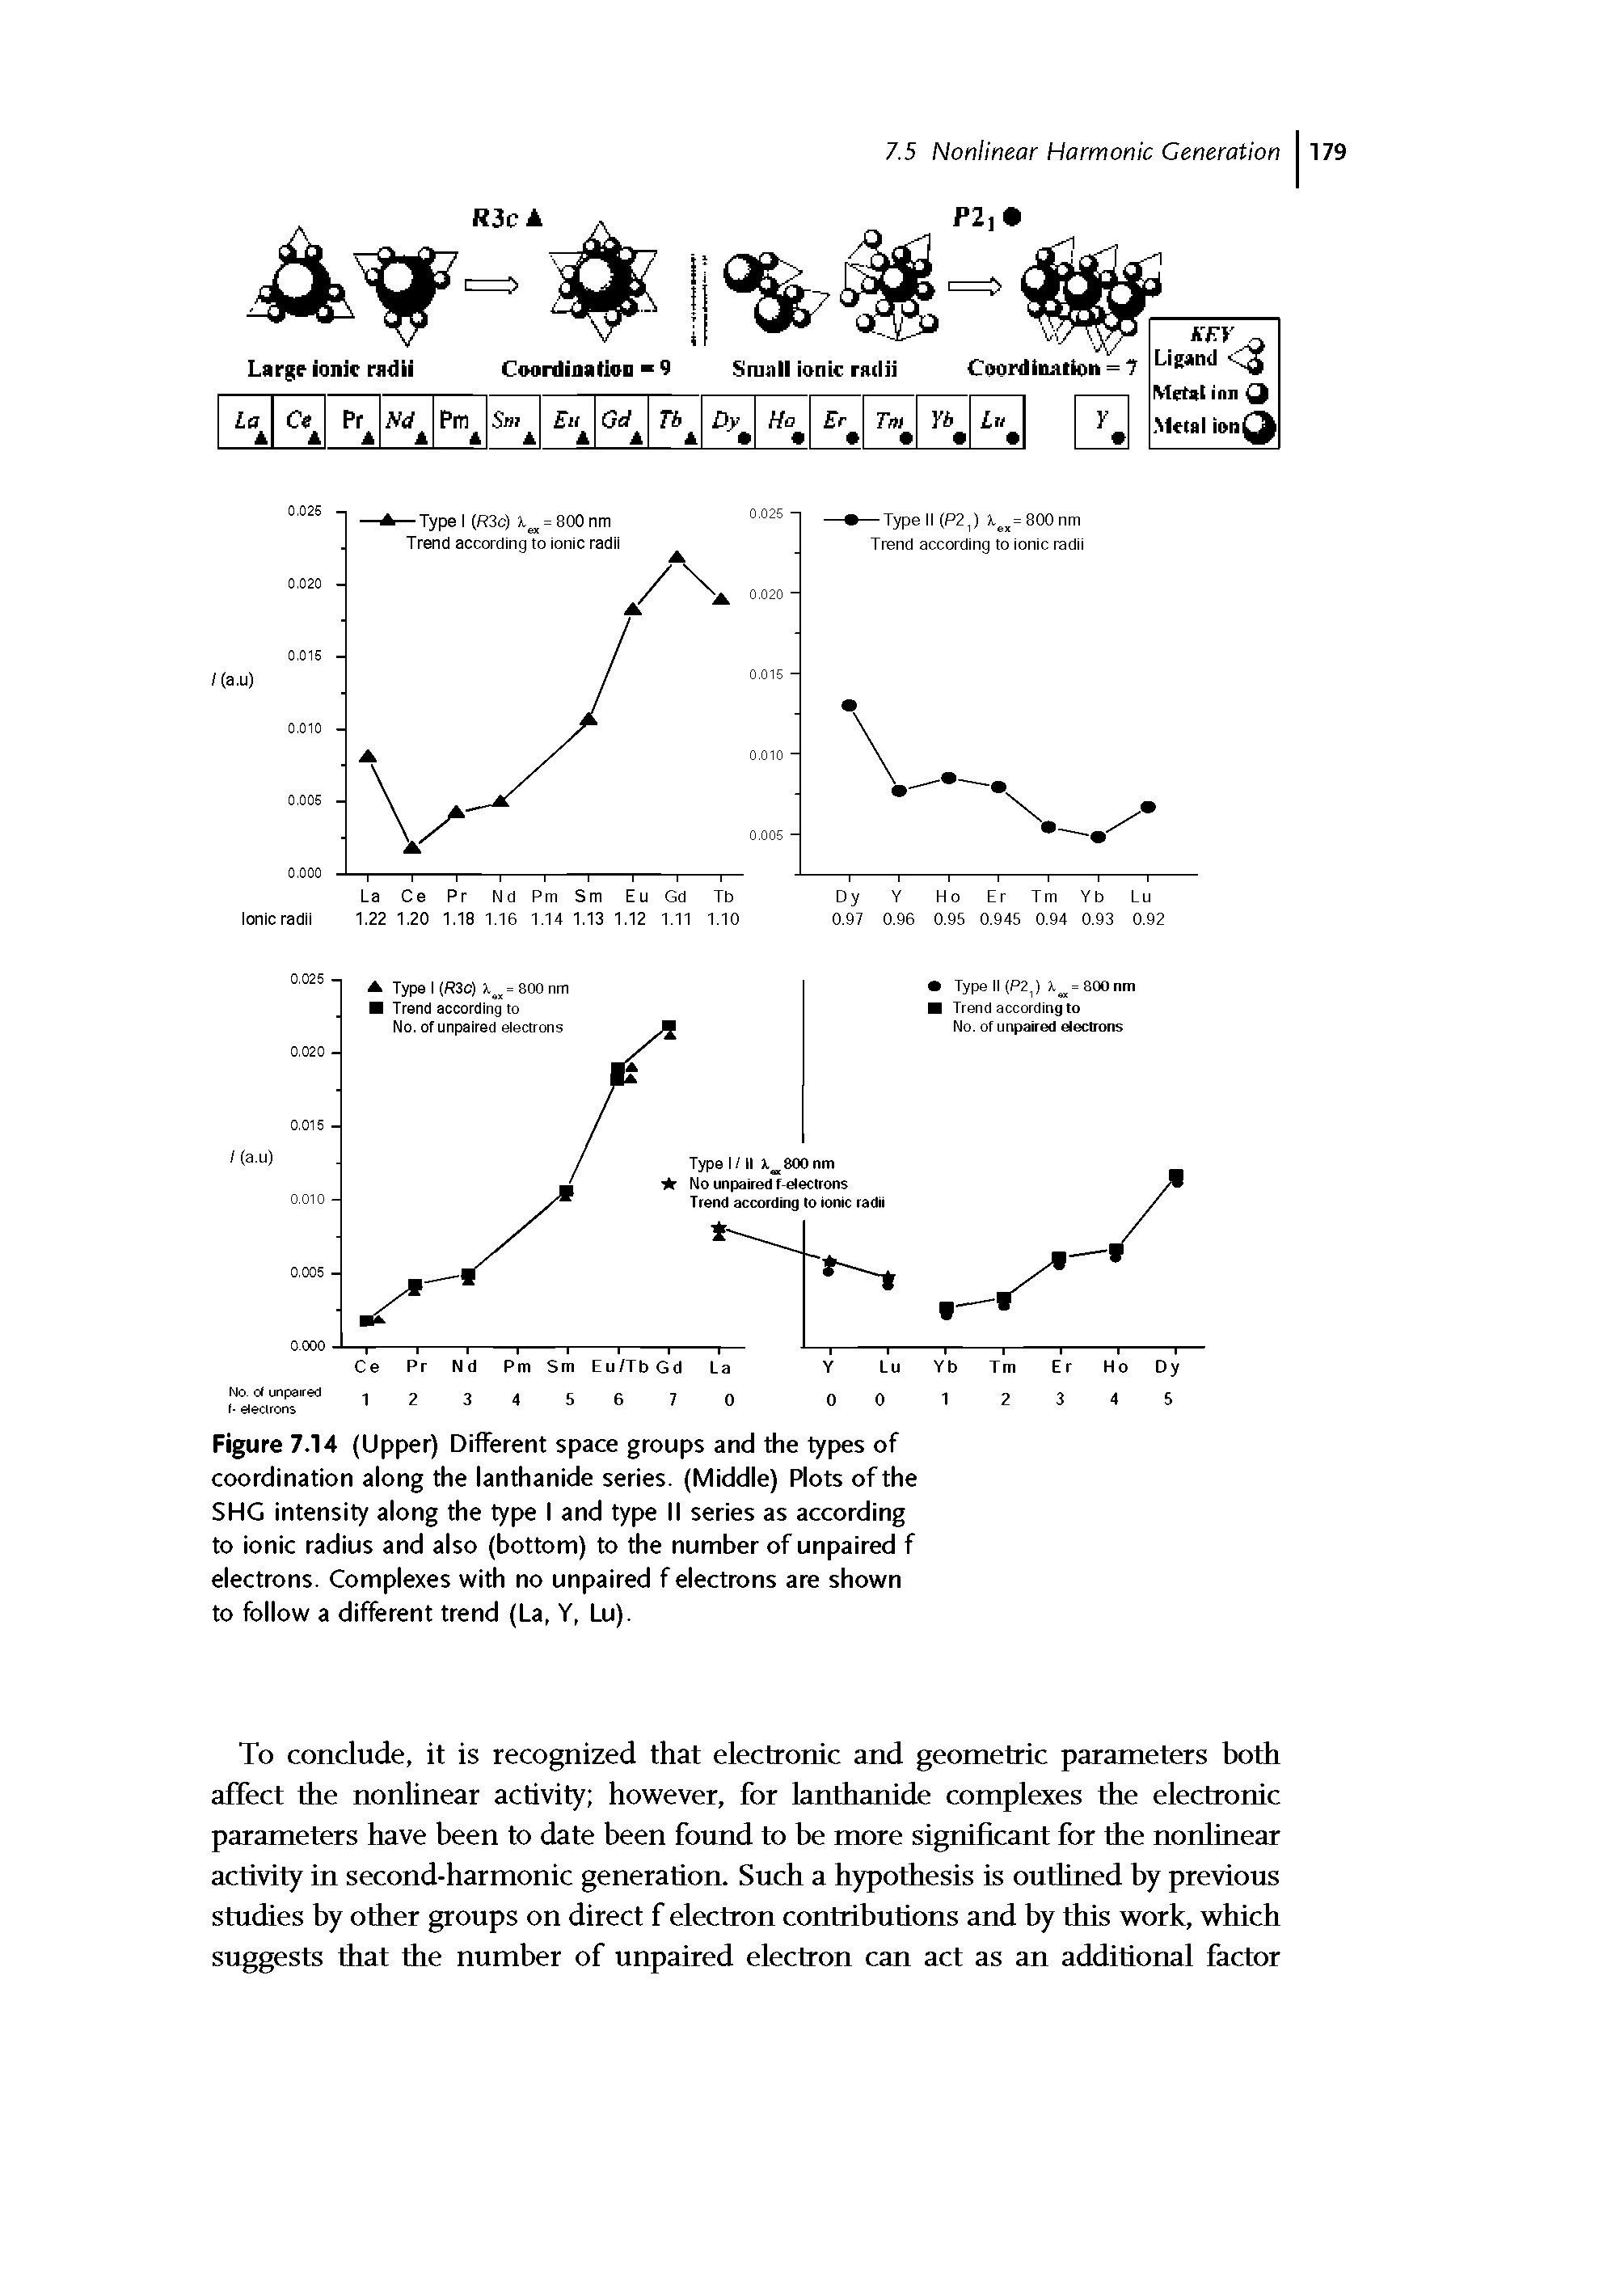 Figure 7.14 (Upper) Different space groups and the types of coordination along the lanthanide series. (Middle) Plots of the SHG intensity along the type I and type II series as according to ionic radius and also (bottom) to the number of unpaired f electrons. Complexes with no unpaired f electrons are shown to follow a different trend (La, Y, Lu).